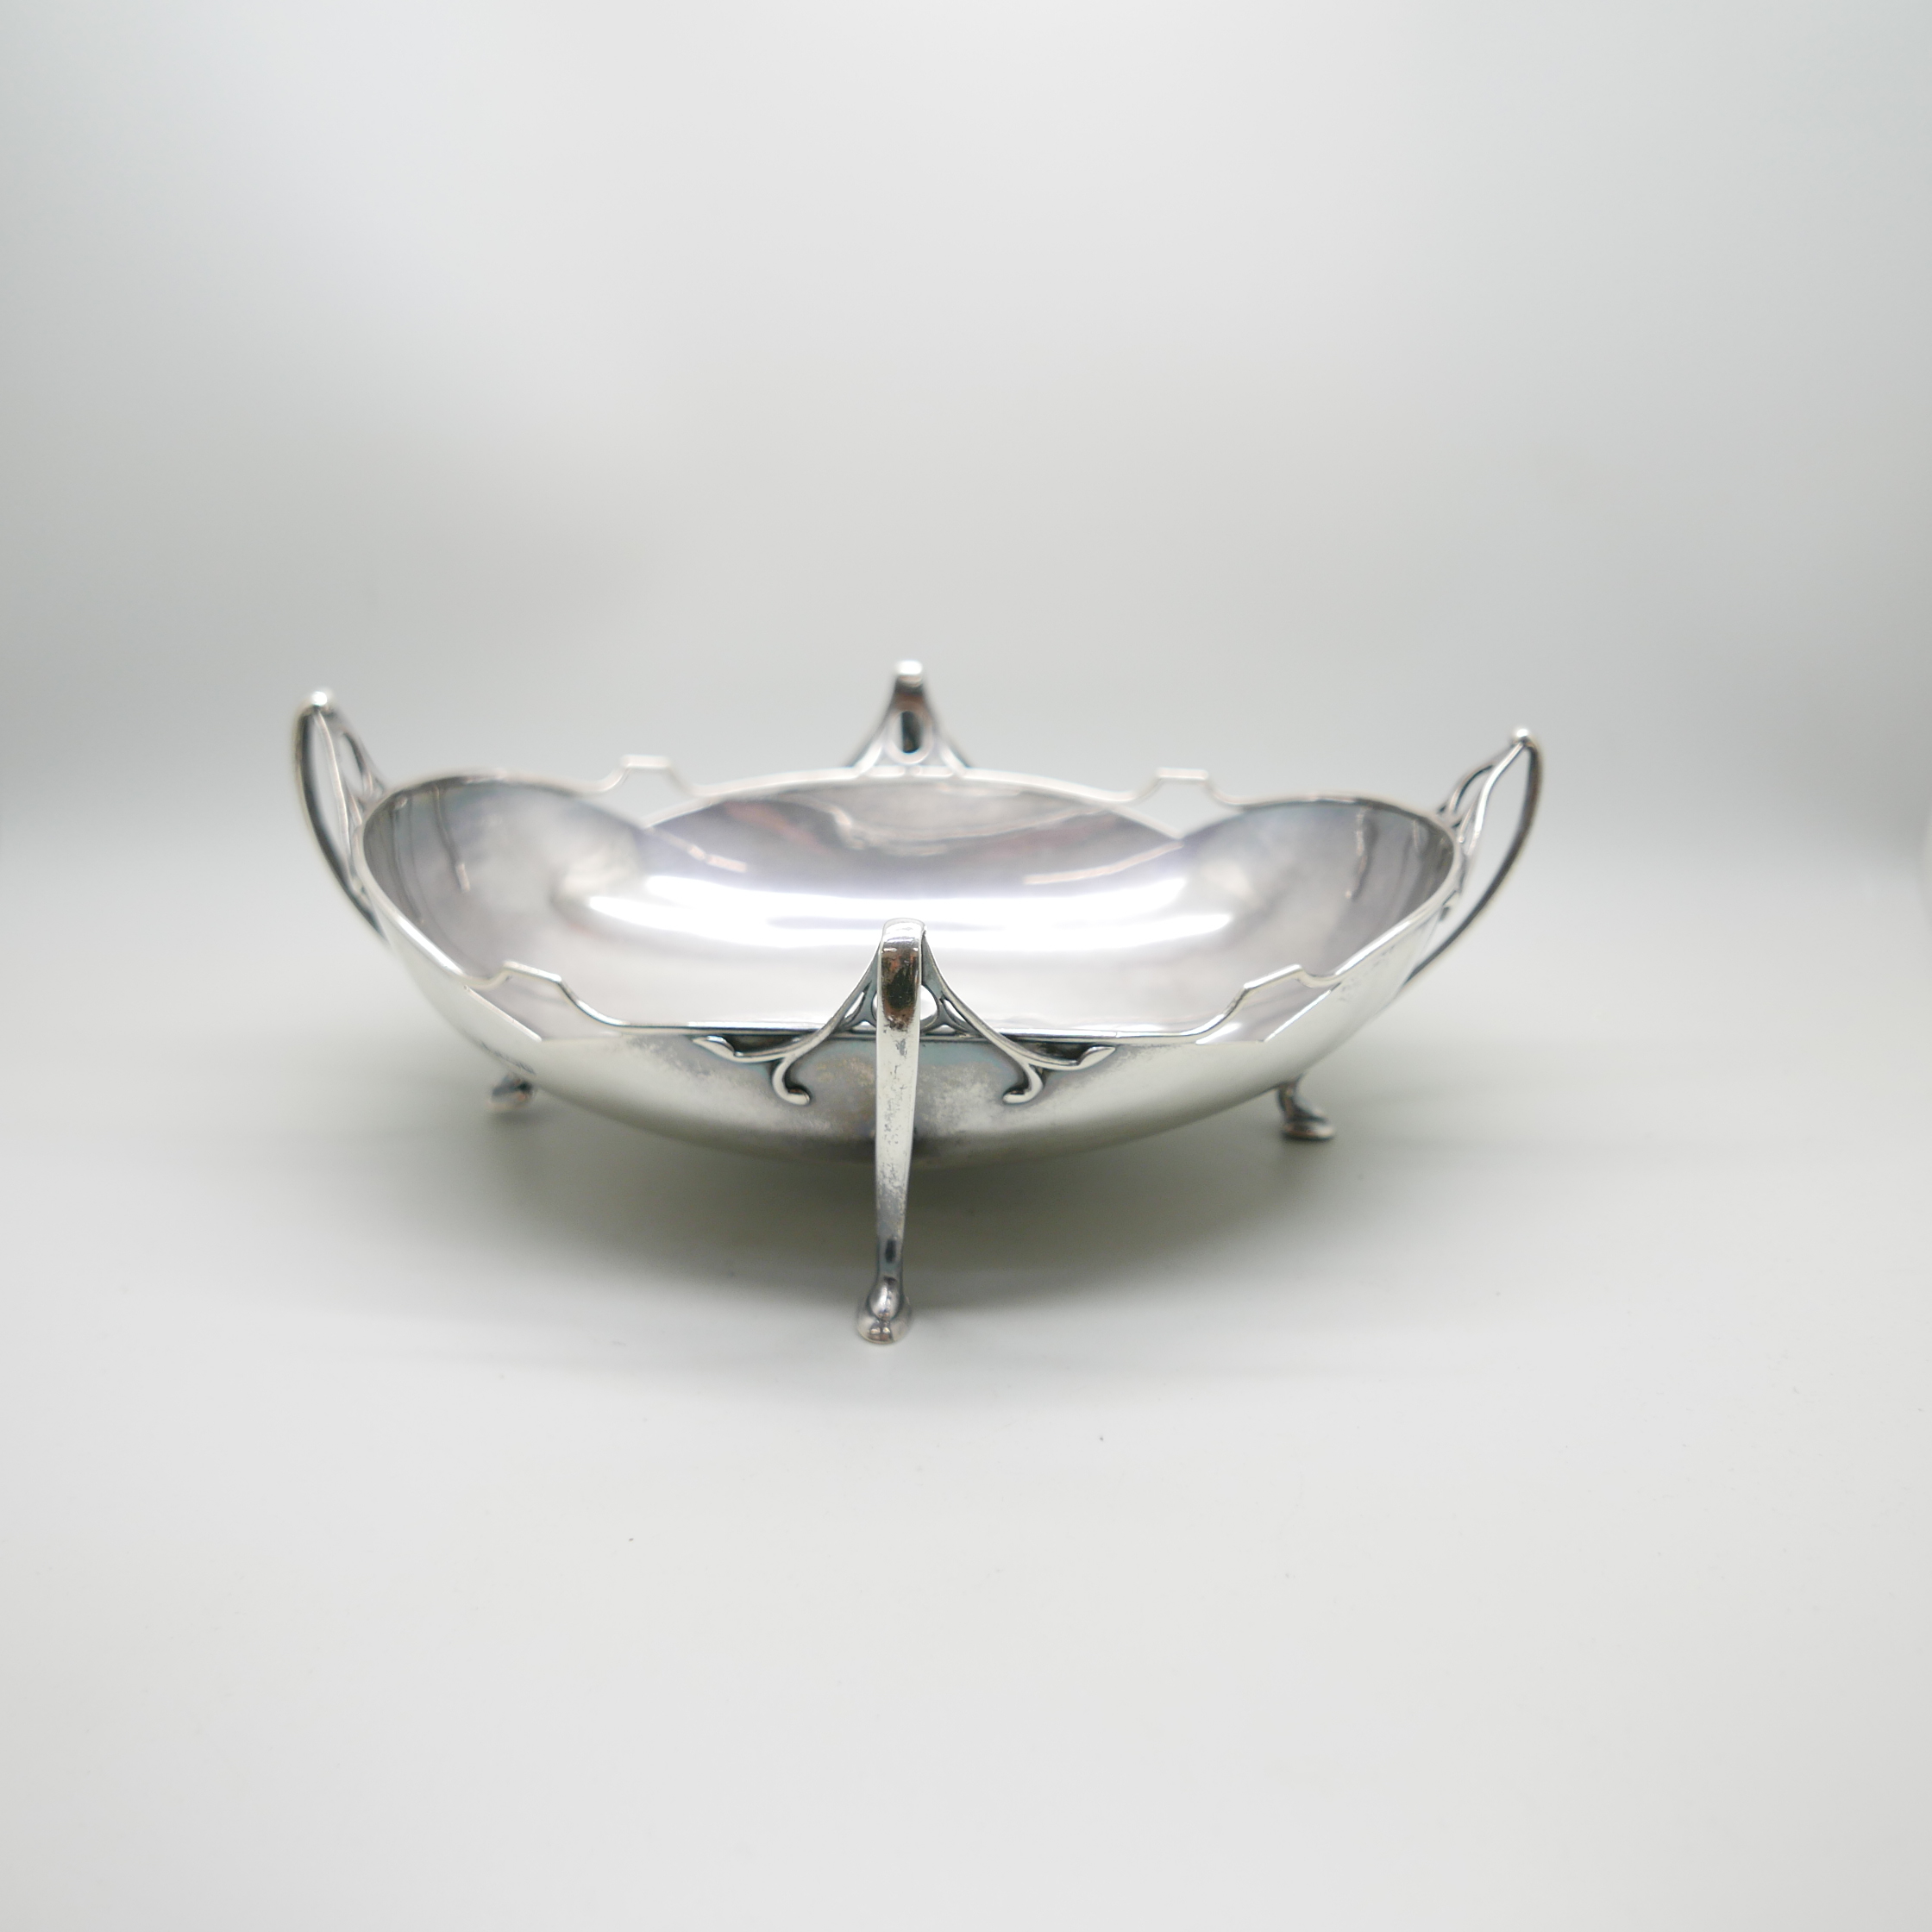 A silver Art Nouveau bowl, Sheffield 1905 by Cooper Brothers & Sons, 430g, 23.5cm wide